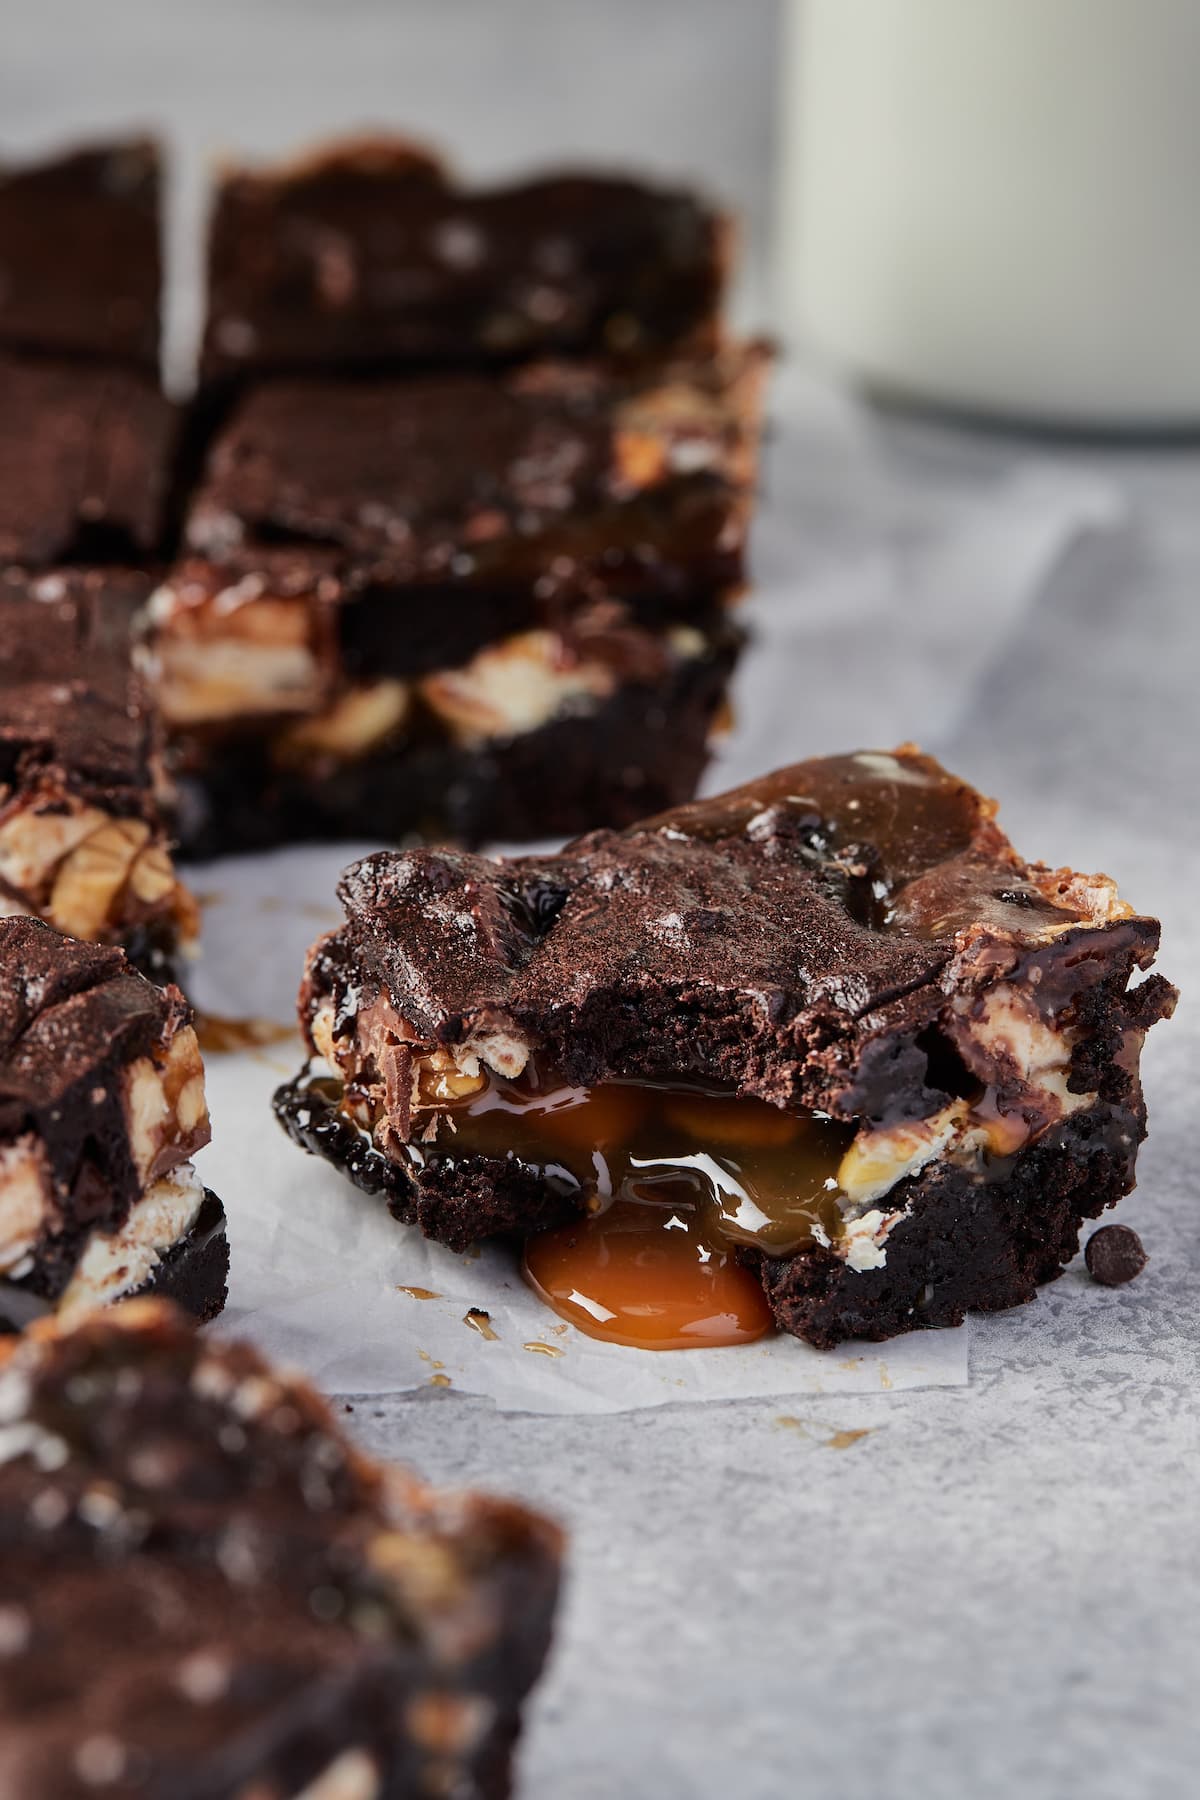 Caramel oozes out from a Snickers brownie, with more brownies scattered in the background.